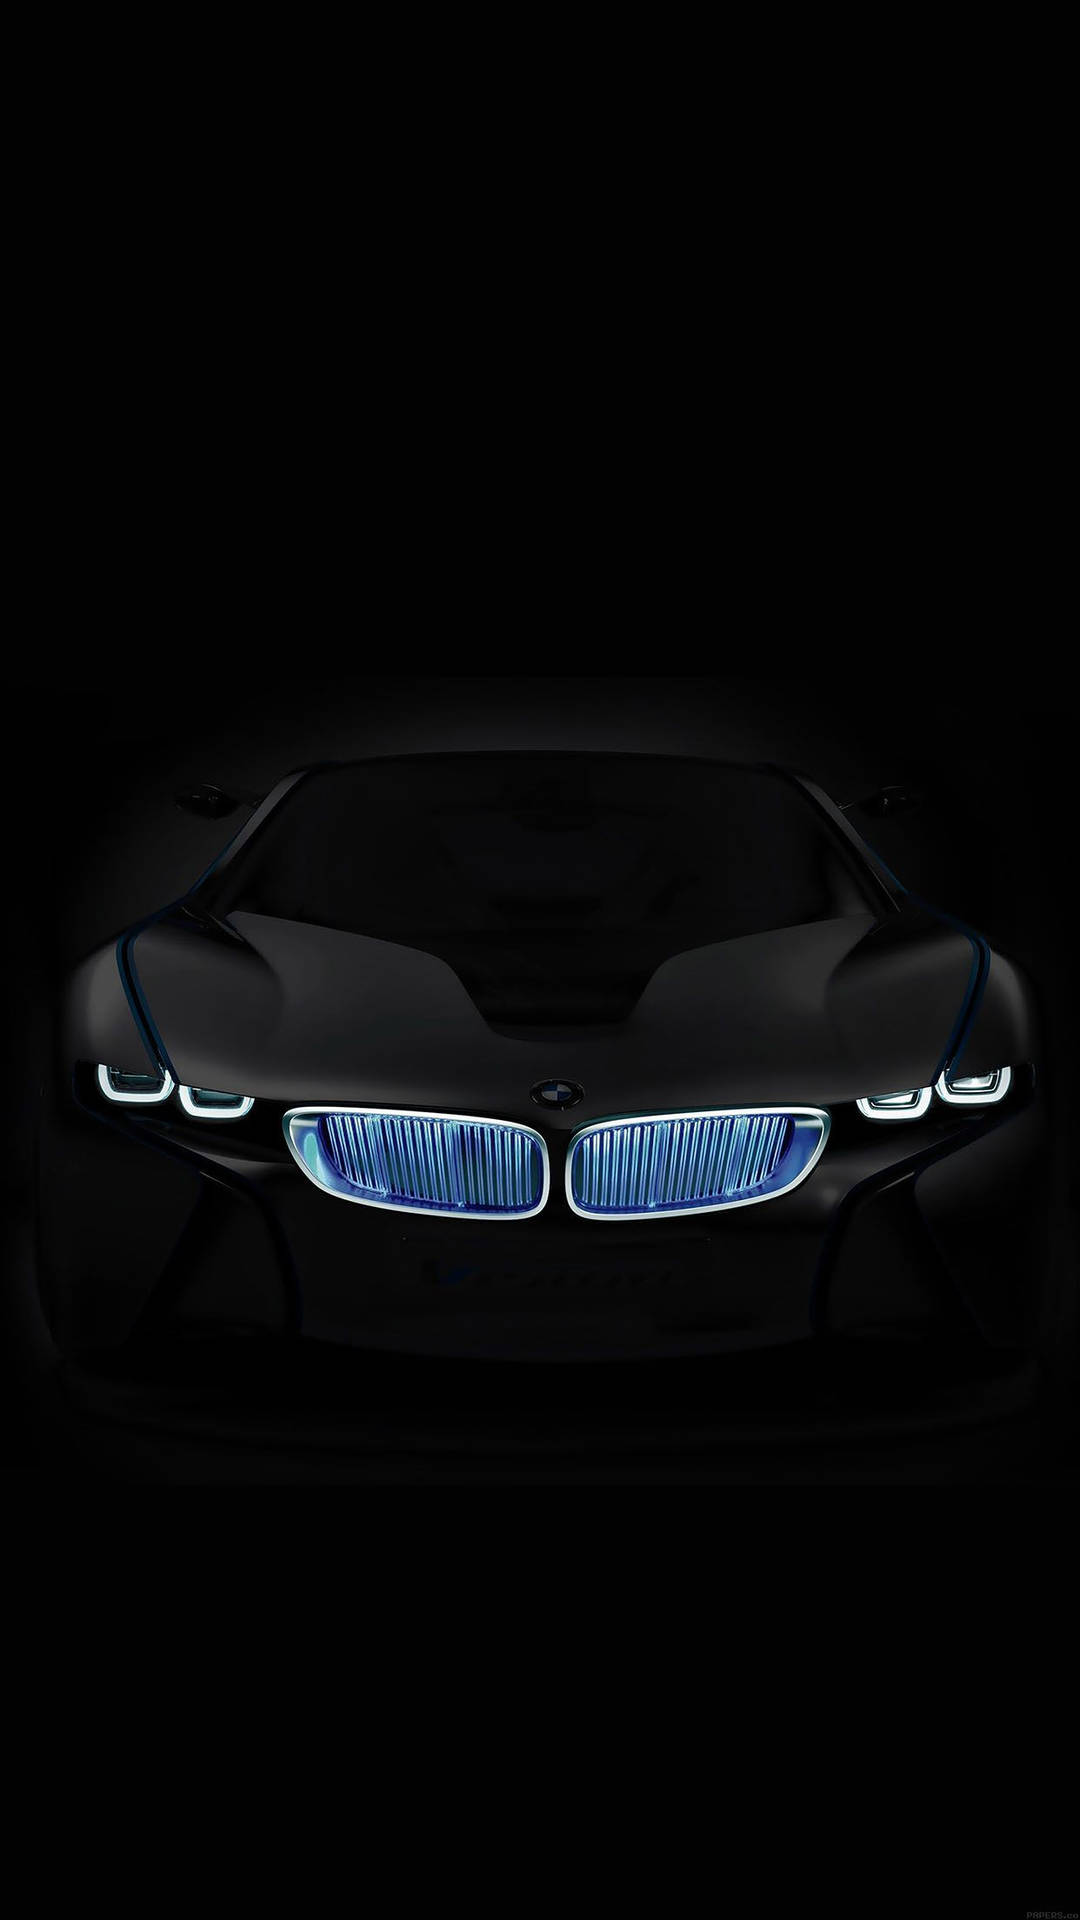 Glowing Blue Grille Bmw iPhone X Wallpaper